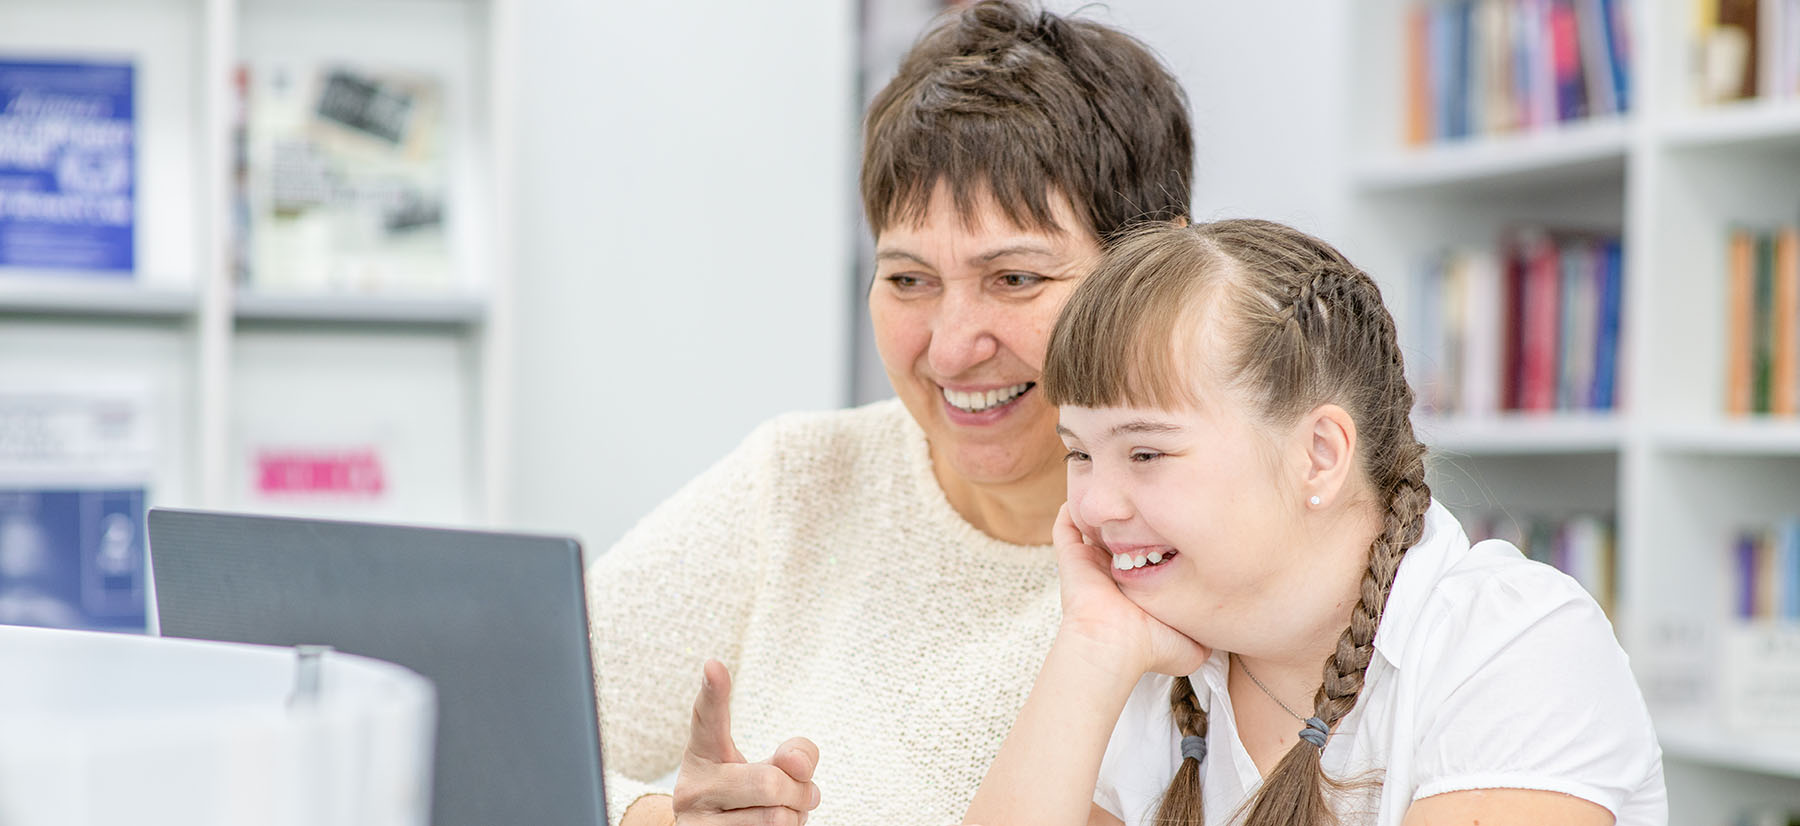 Happy teacher and smiling girl with down syndrome use a laptop a